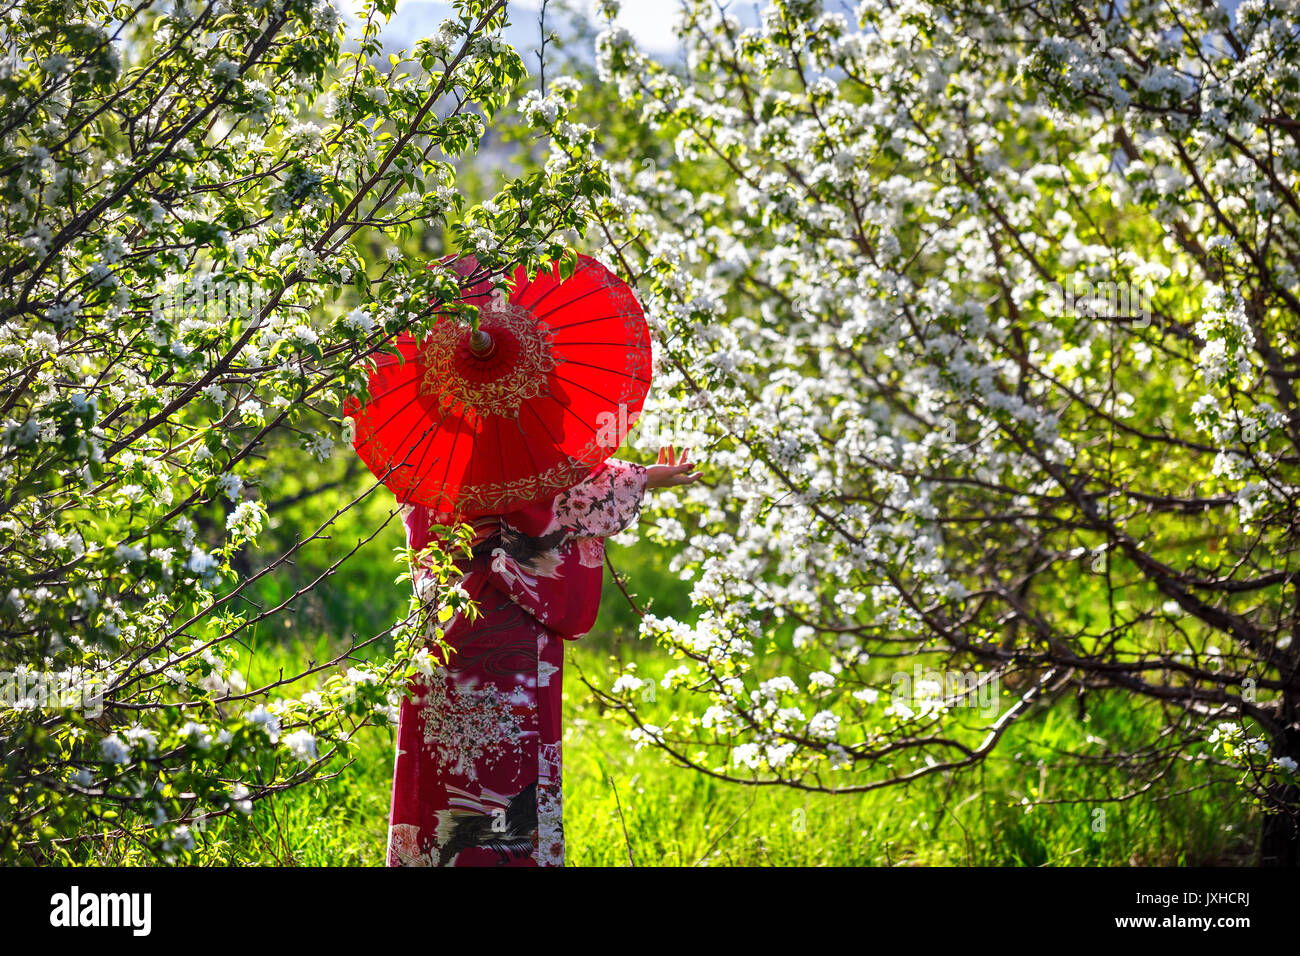 Woman in kimono with red umbrella in the garden with cherry flowers blossom at sunrise Stock Photo